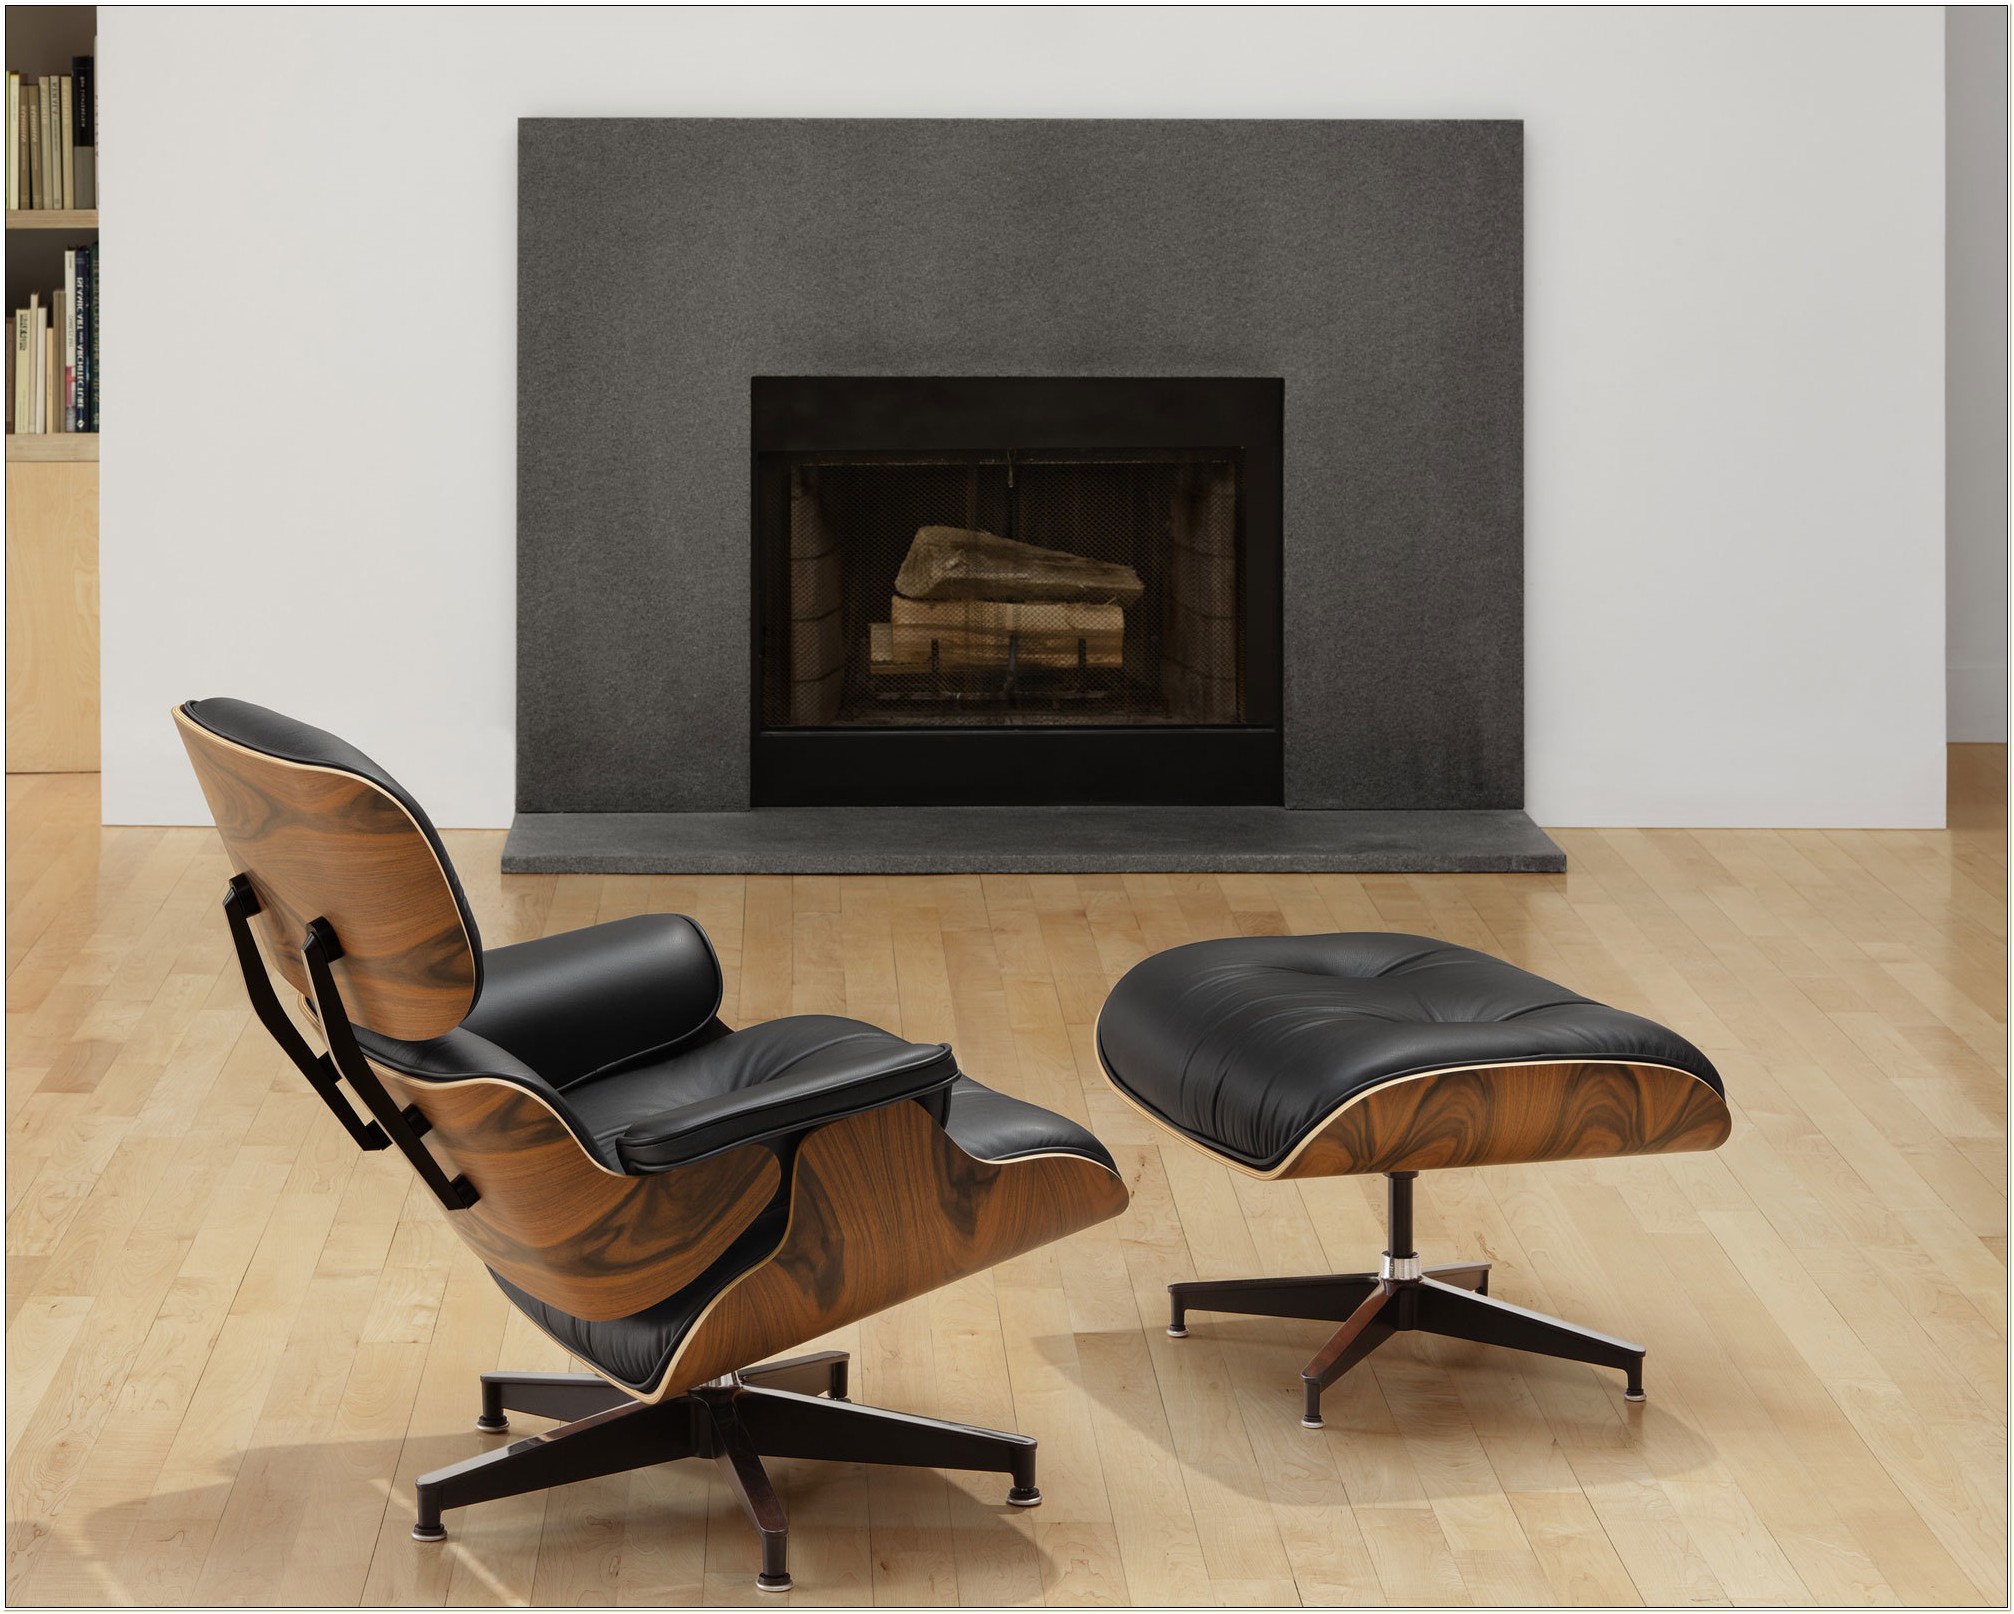 Herman Miller Eames Lounge Chair Replica - Chairs : Home Decorating